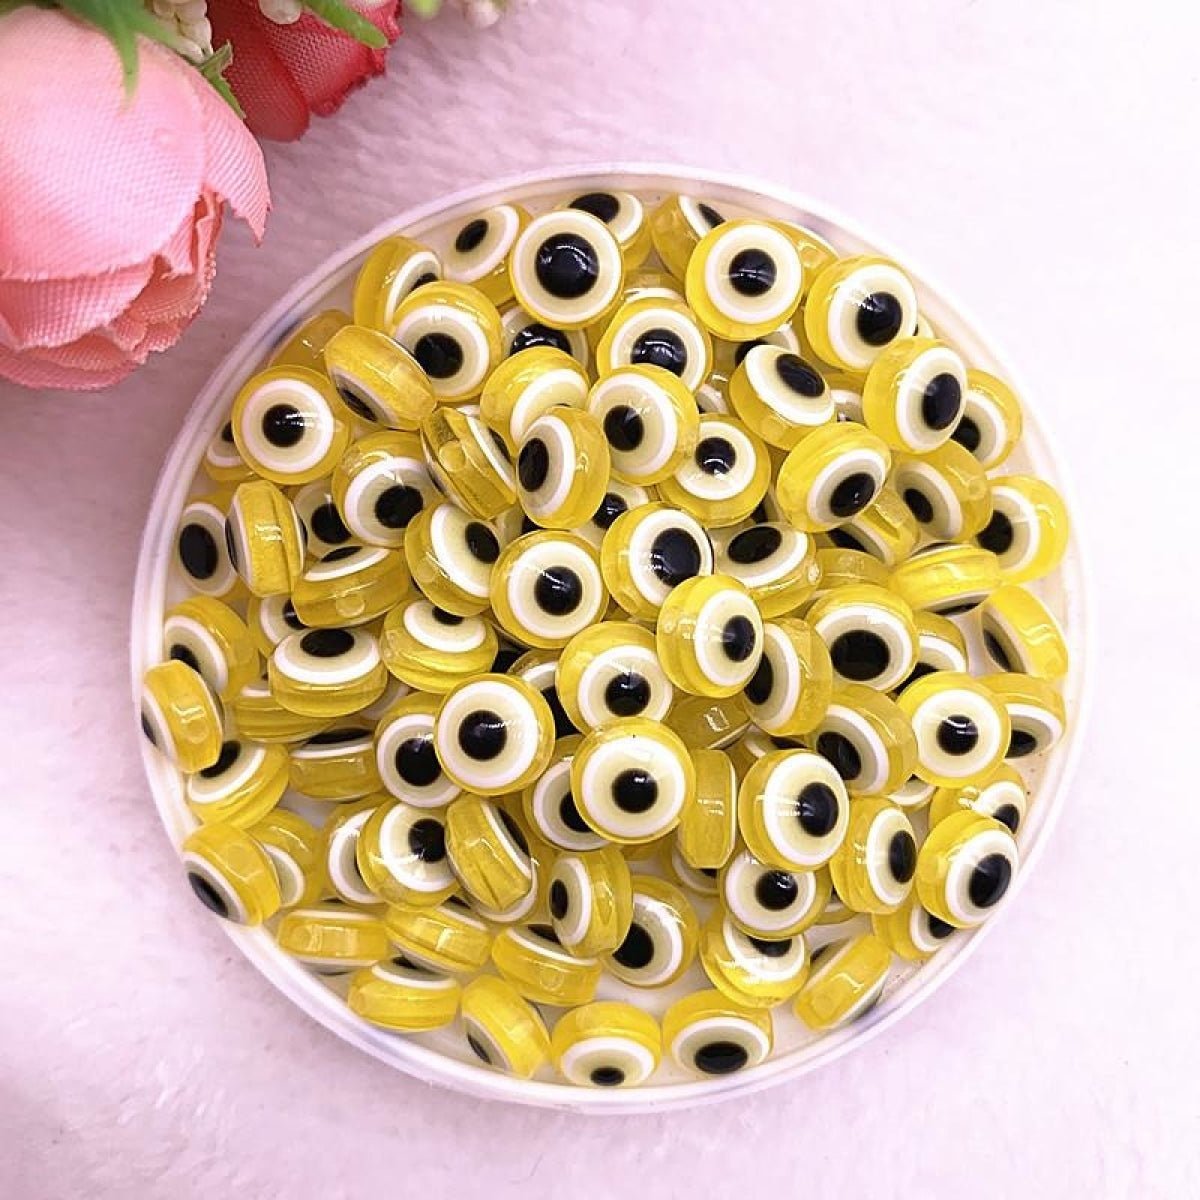 48pcs 8/10mm Oval Resin Spacer Beads Double Sided Eyes for Jewellery Making DIY Bracelet Beads Set B - Yellow 8mm - - Asia Sell